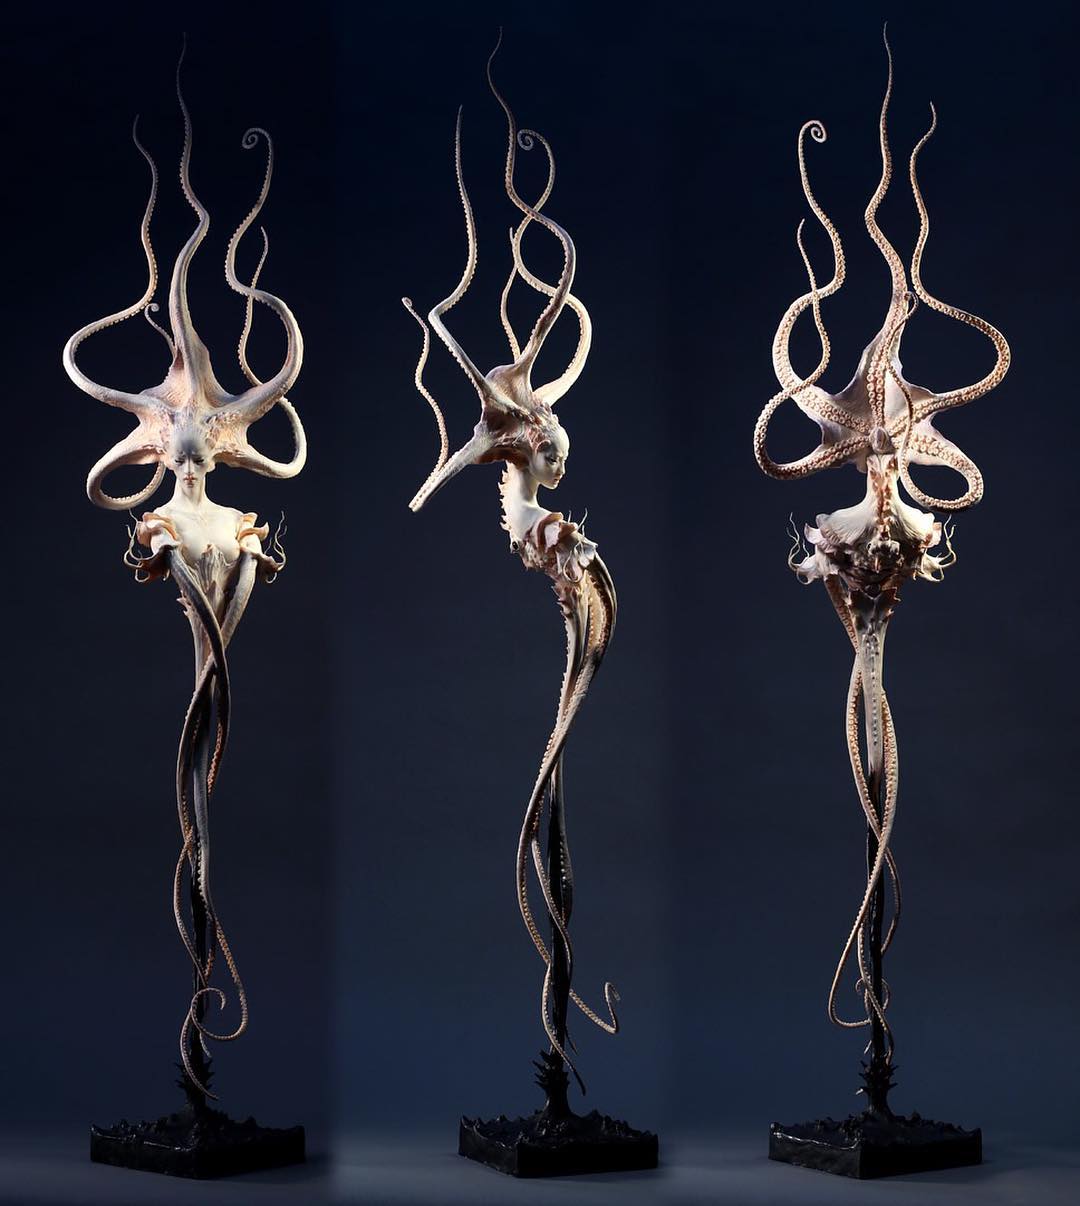 Magical Surreal And Allegorical Sculptures Of Fantastical Beings By Forest Rogers 19